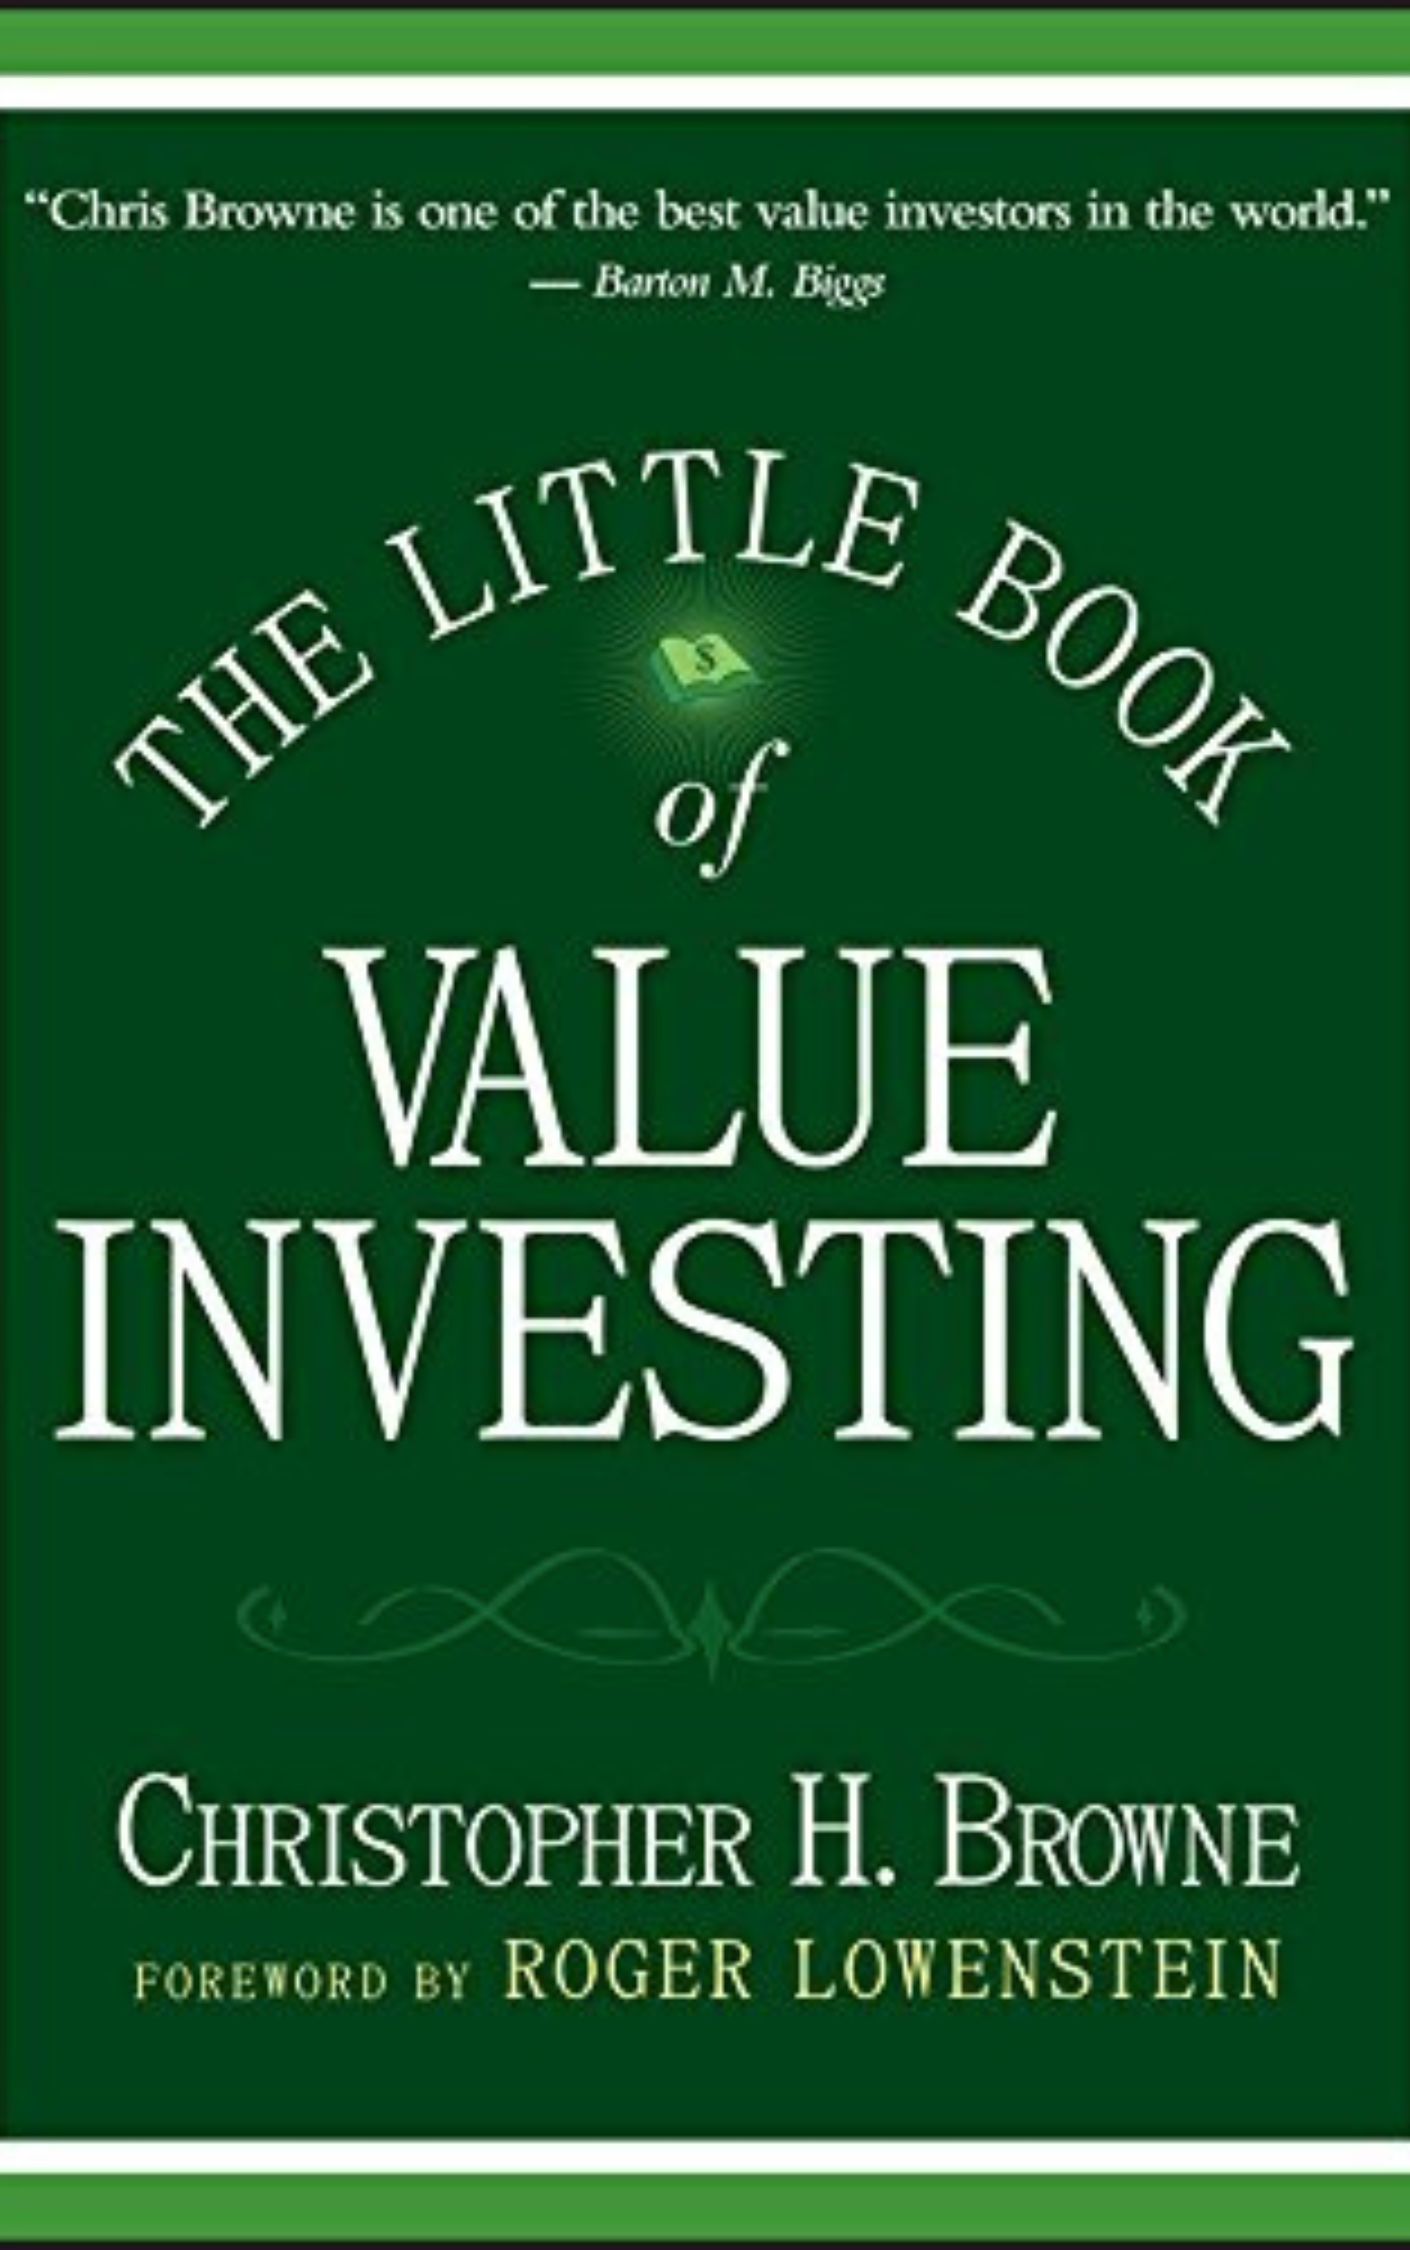 THE LITTLE BOOK OF VALUE INVESTING (HARDCOVER) BY  CHRISTOPHER H. BROWNE